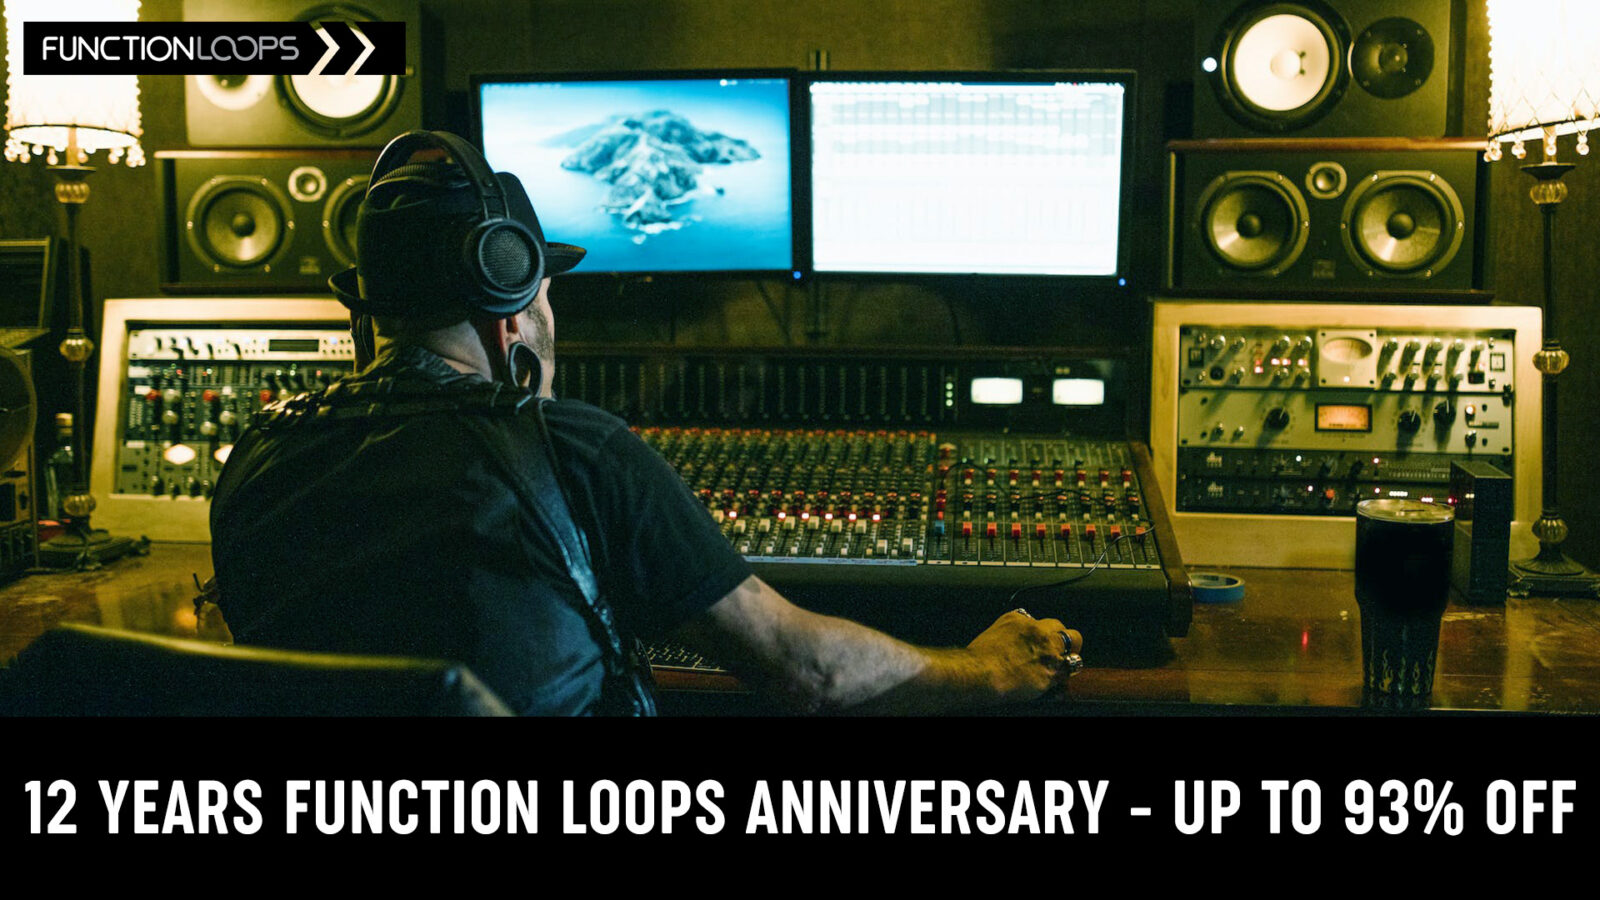 Function Loops Celebrates 12 Years by Offering up to 93% Off!